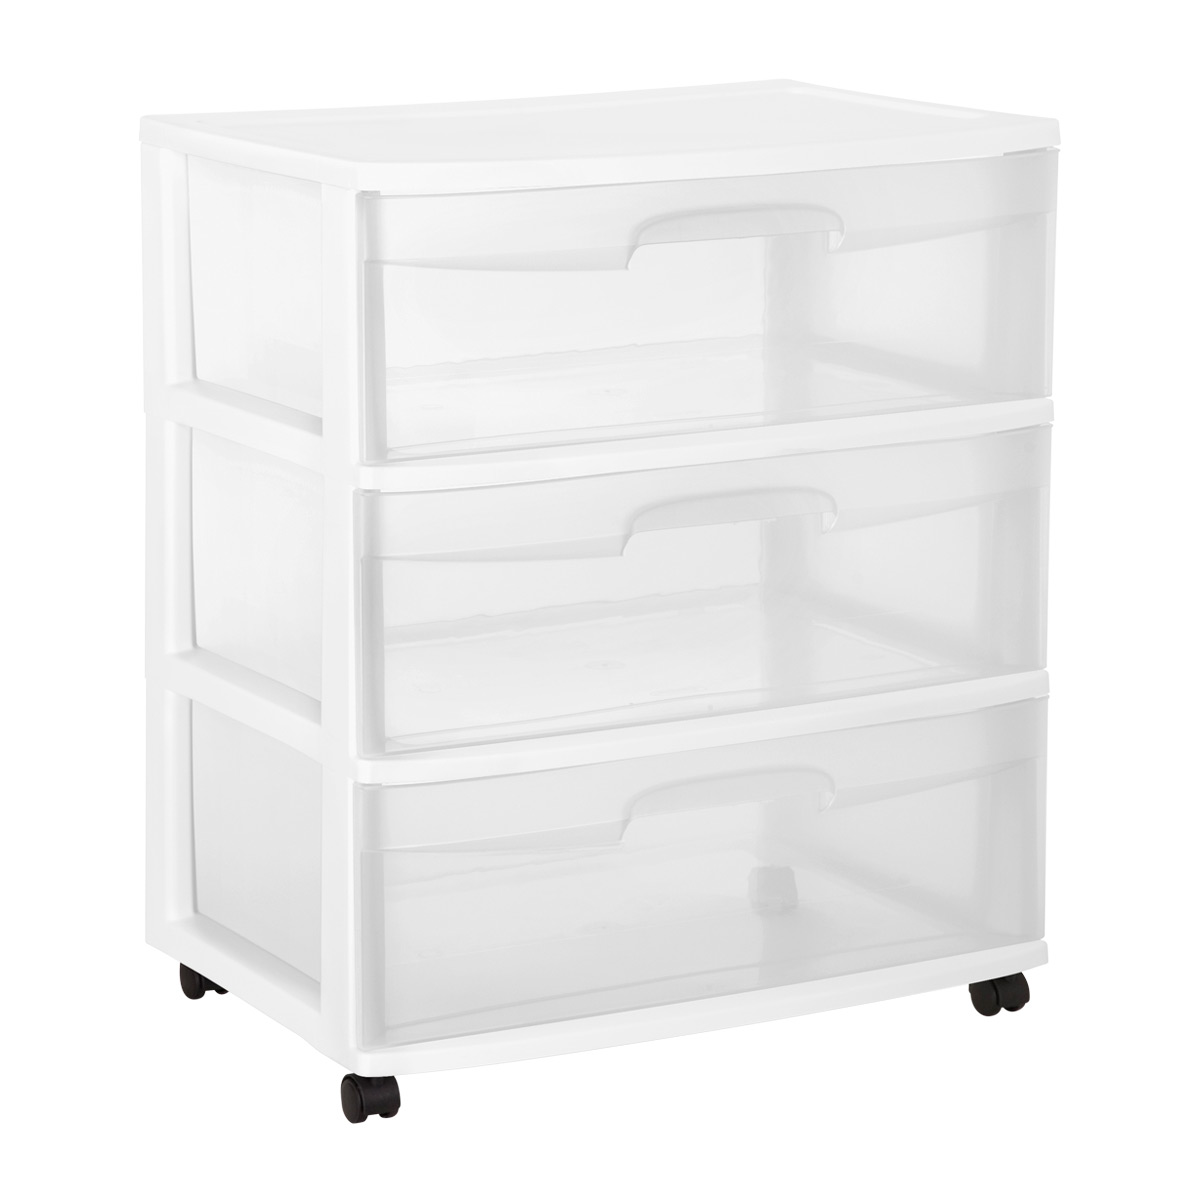 https://www.containerstore.com/catalogimages/369134/10077653-3-drawer-chest-wide-white-c.jpg